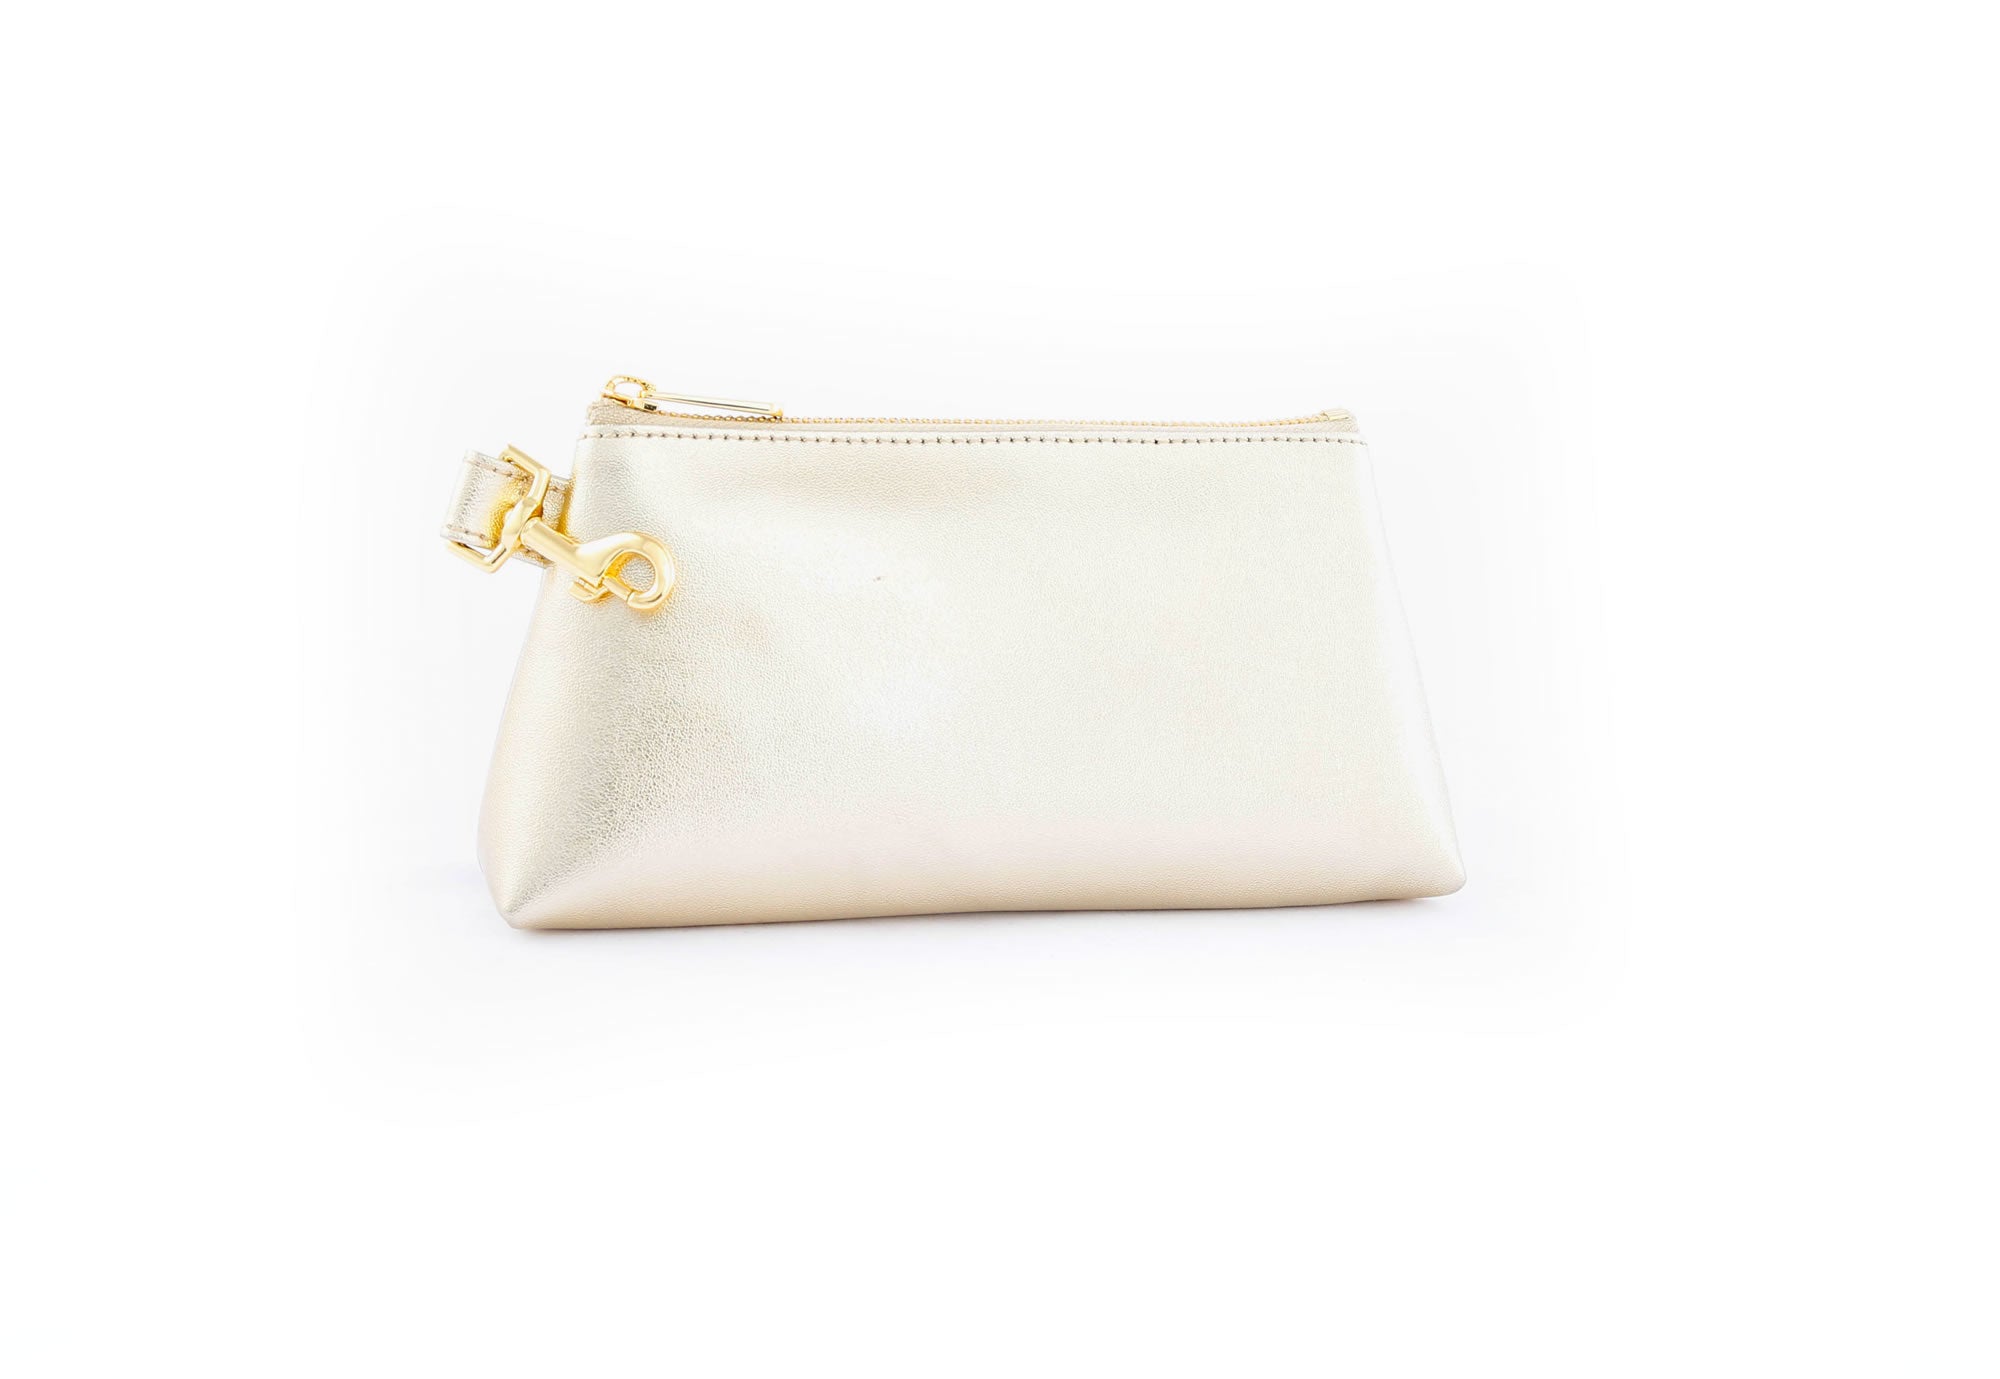 Hogoo Luxury White Pearl Purses Shoulder Bag for Women Pearl Bag Crossbody  Beaded Clutch Evening Bag (White Set1), Pearl White, Small : Amazon.in:  Fashion